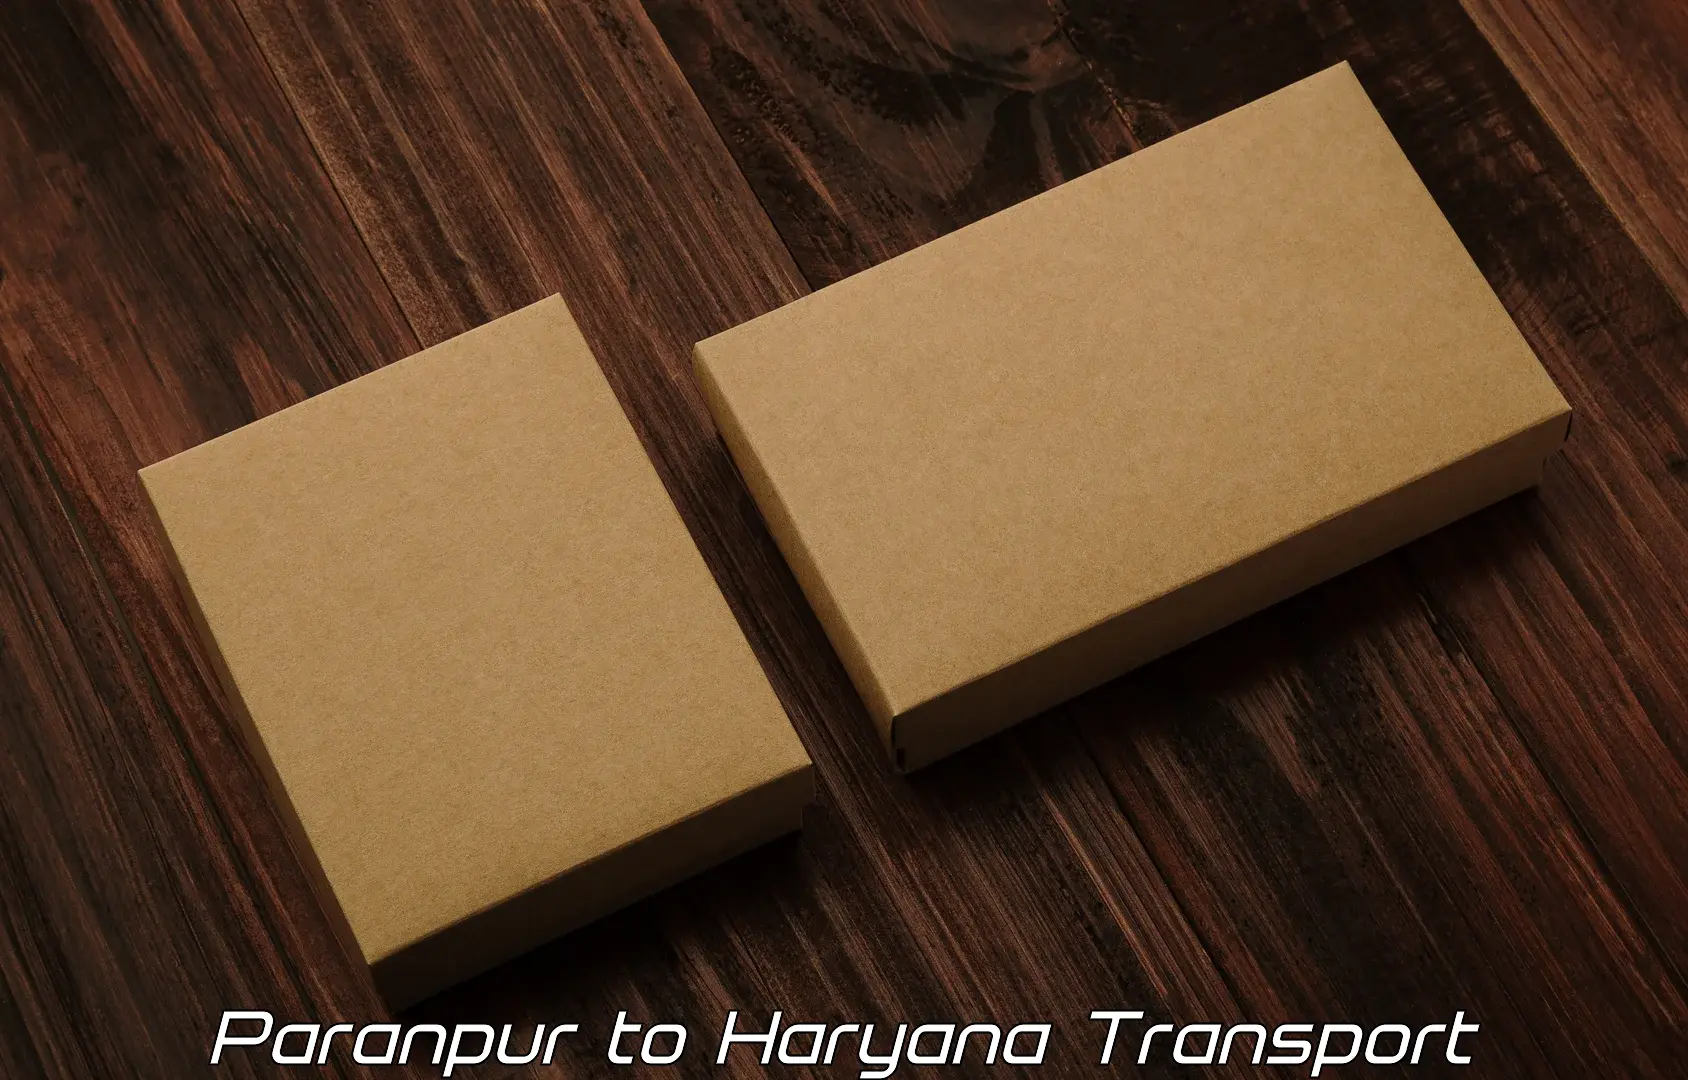 Daily transport service in Paranpur to NCR Haryana